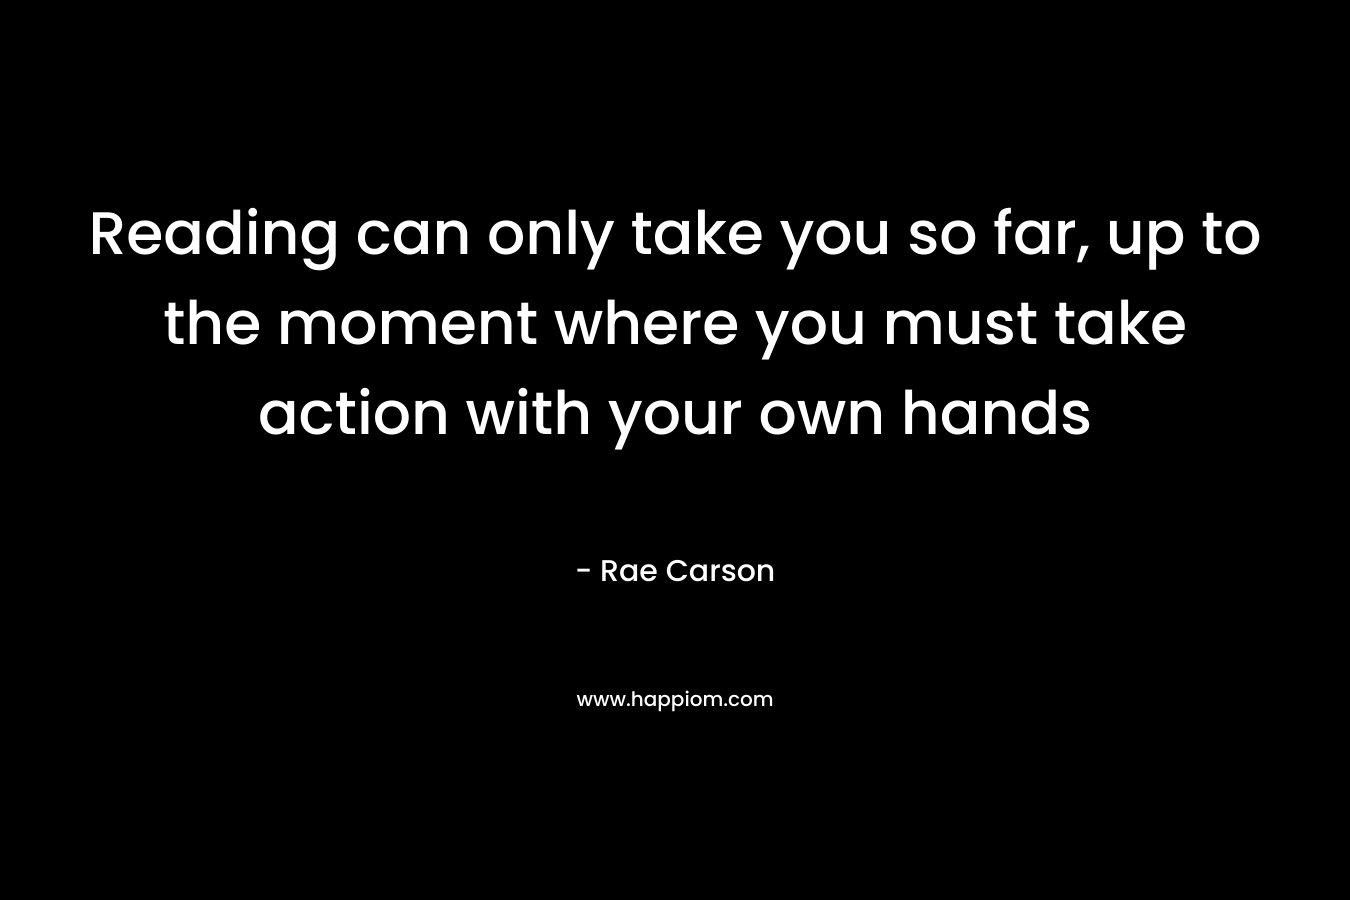 Reading can only take you so far, up to the moment where you must take action with your own hands